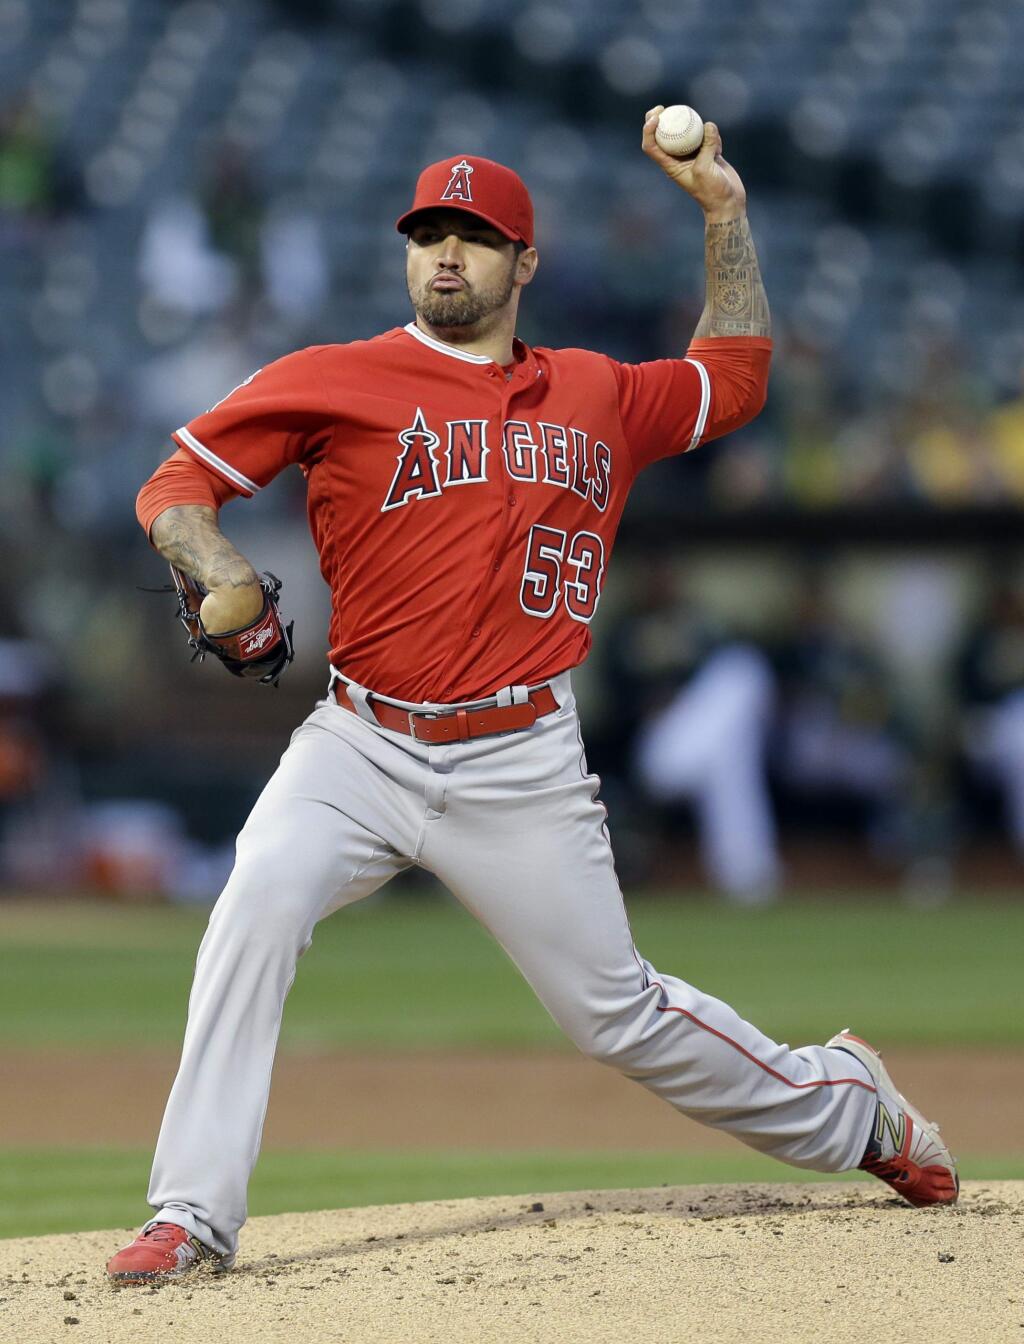 Los Angeles Angels pitcher Hector Santiago works against the Oakland Athletics in the first inning of a baseball game Tuesday, April 12, 2016, in Oakland, Calif. (AP Photo/Ben Margot)